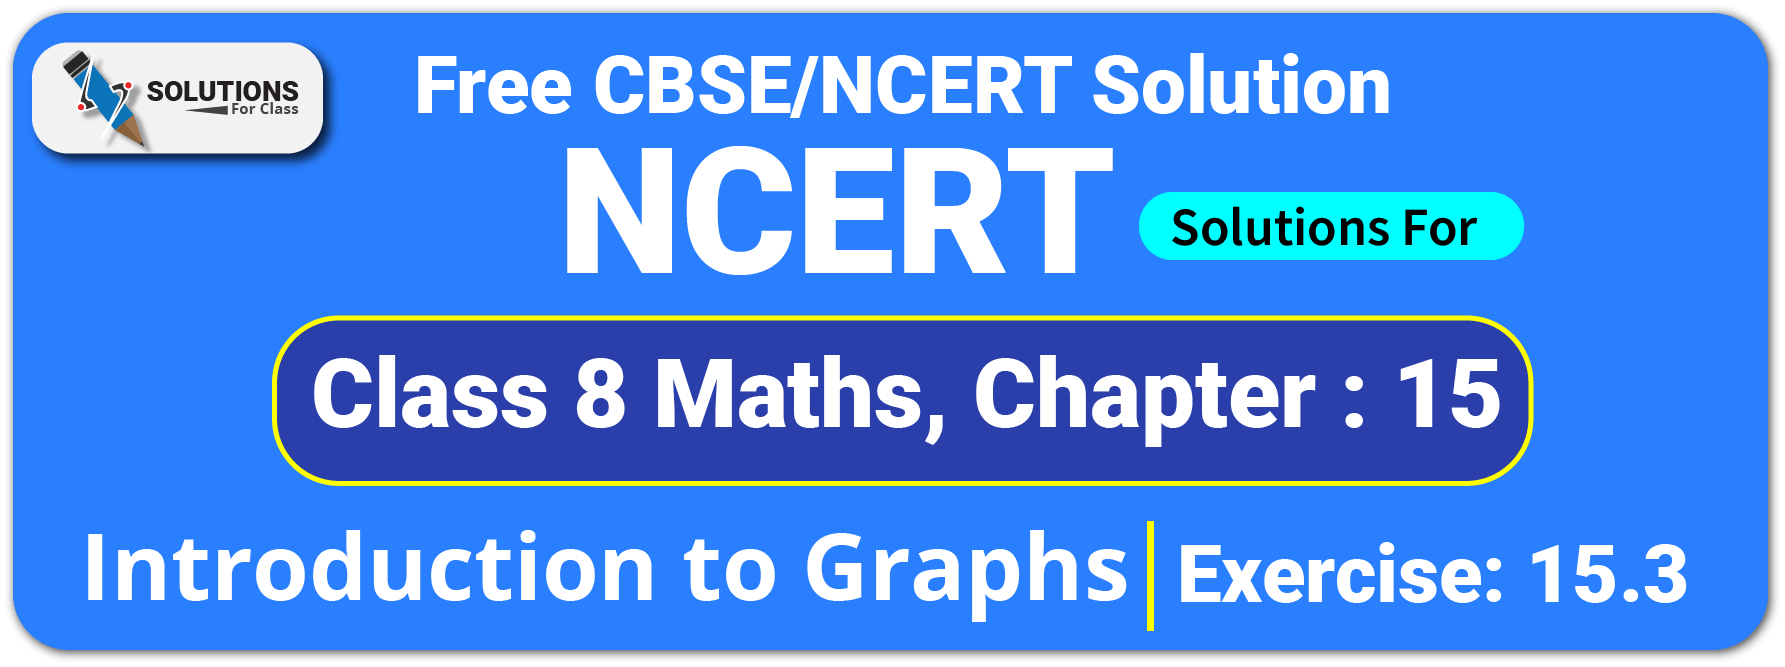 NCERT Solutions For Class 8 Chapter 15, Introduction to Graphs, Exercise15.3